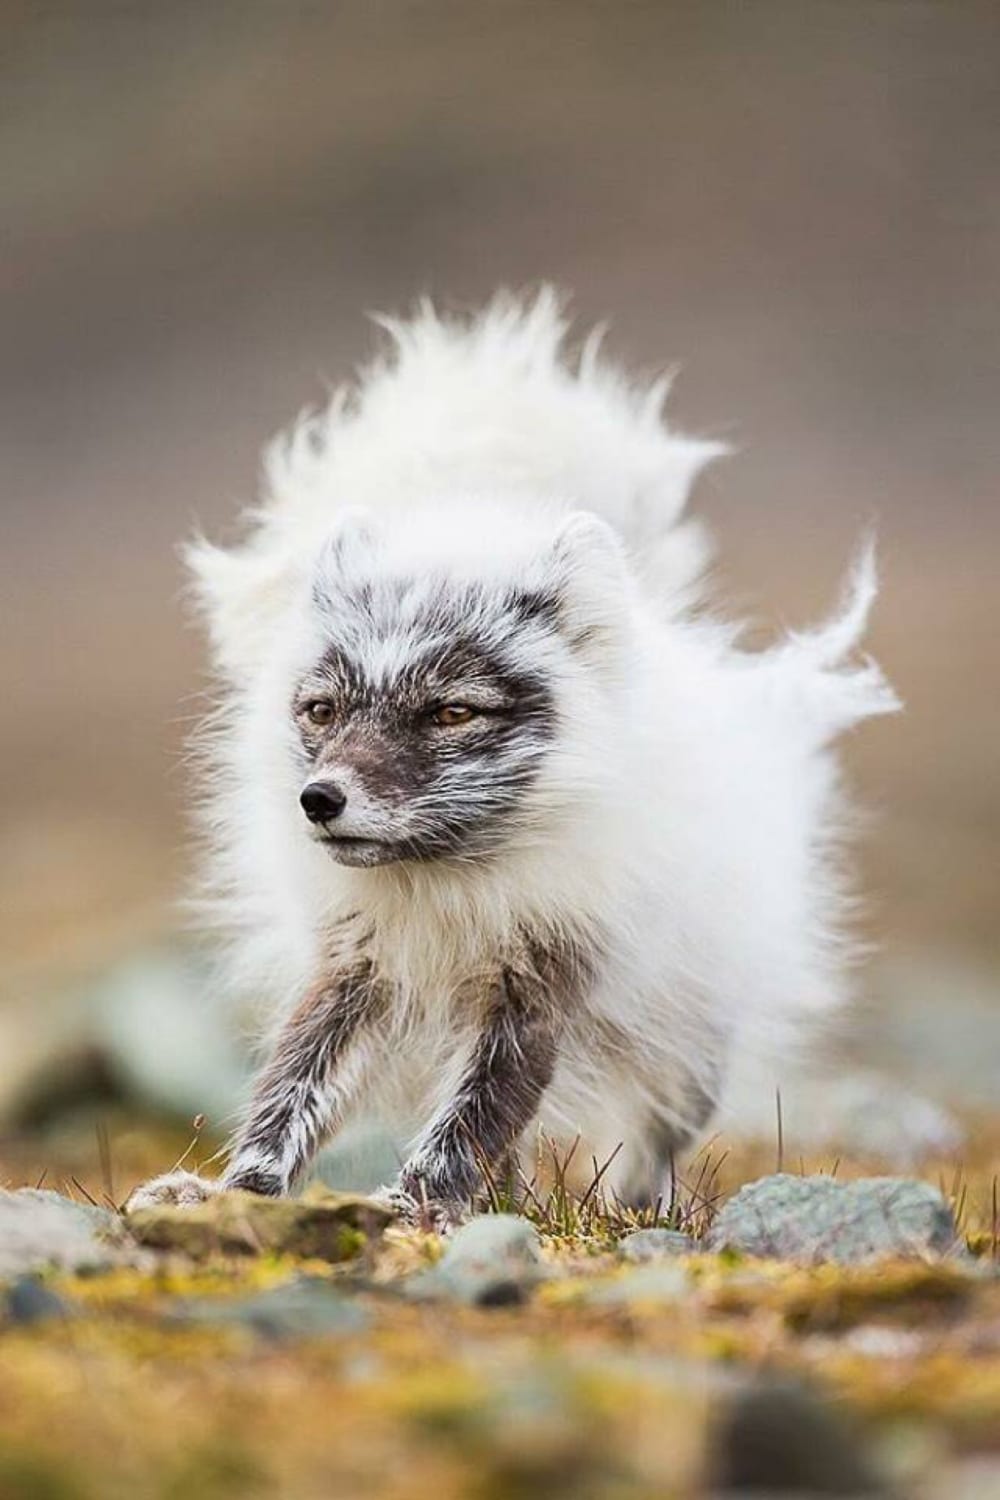 An arctic fox during a coat change from winter to summer